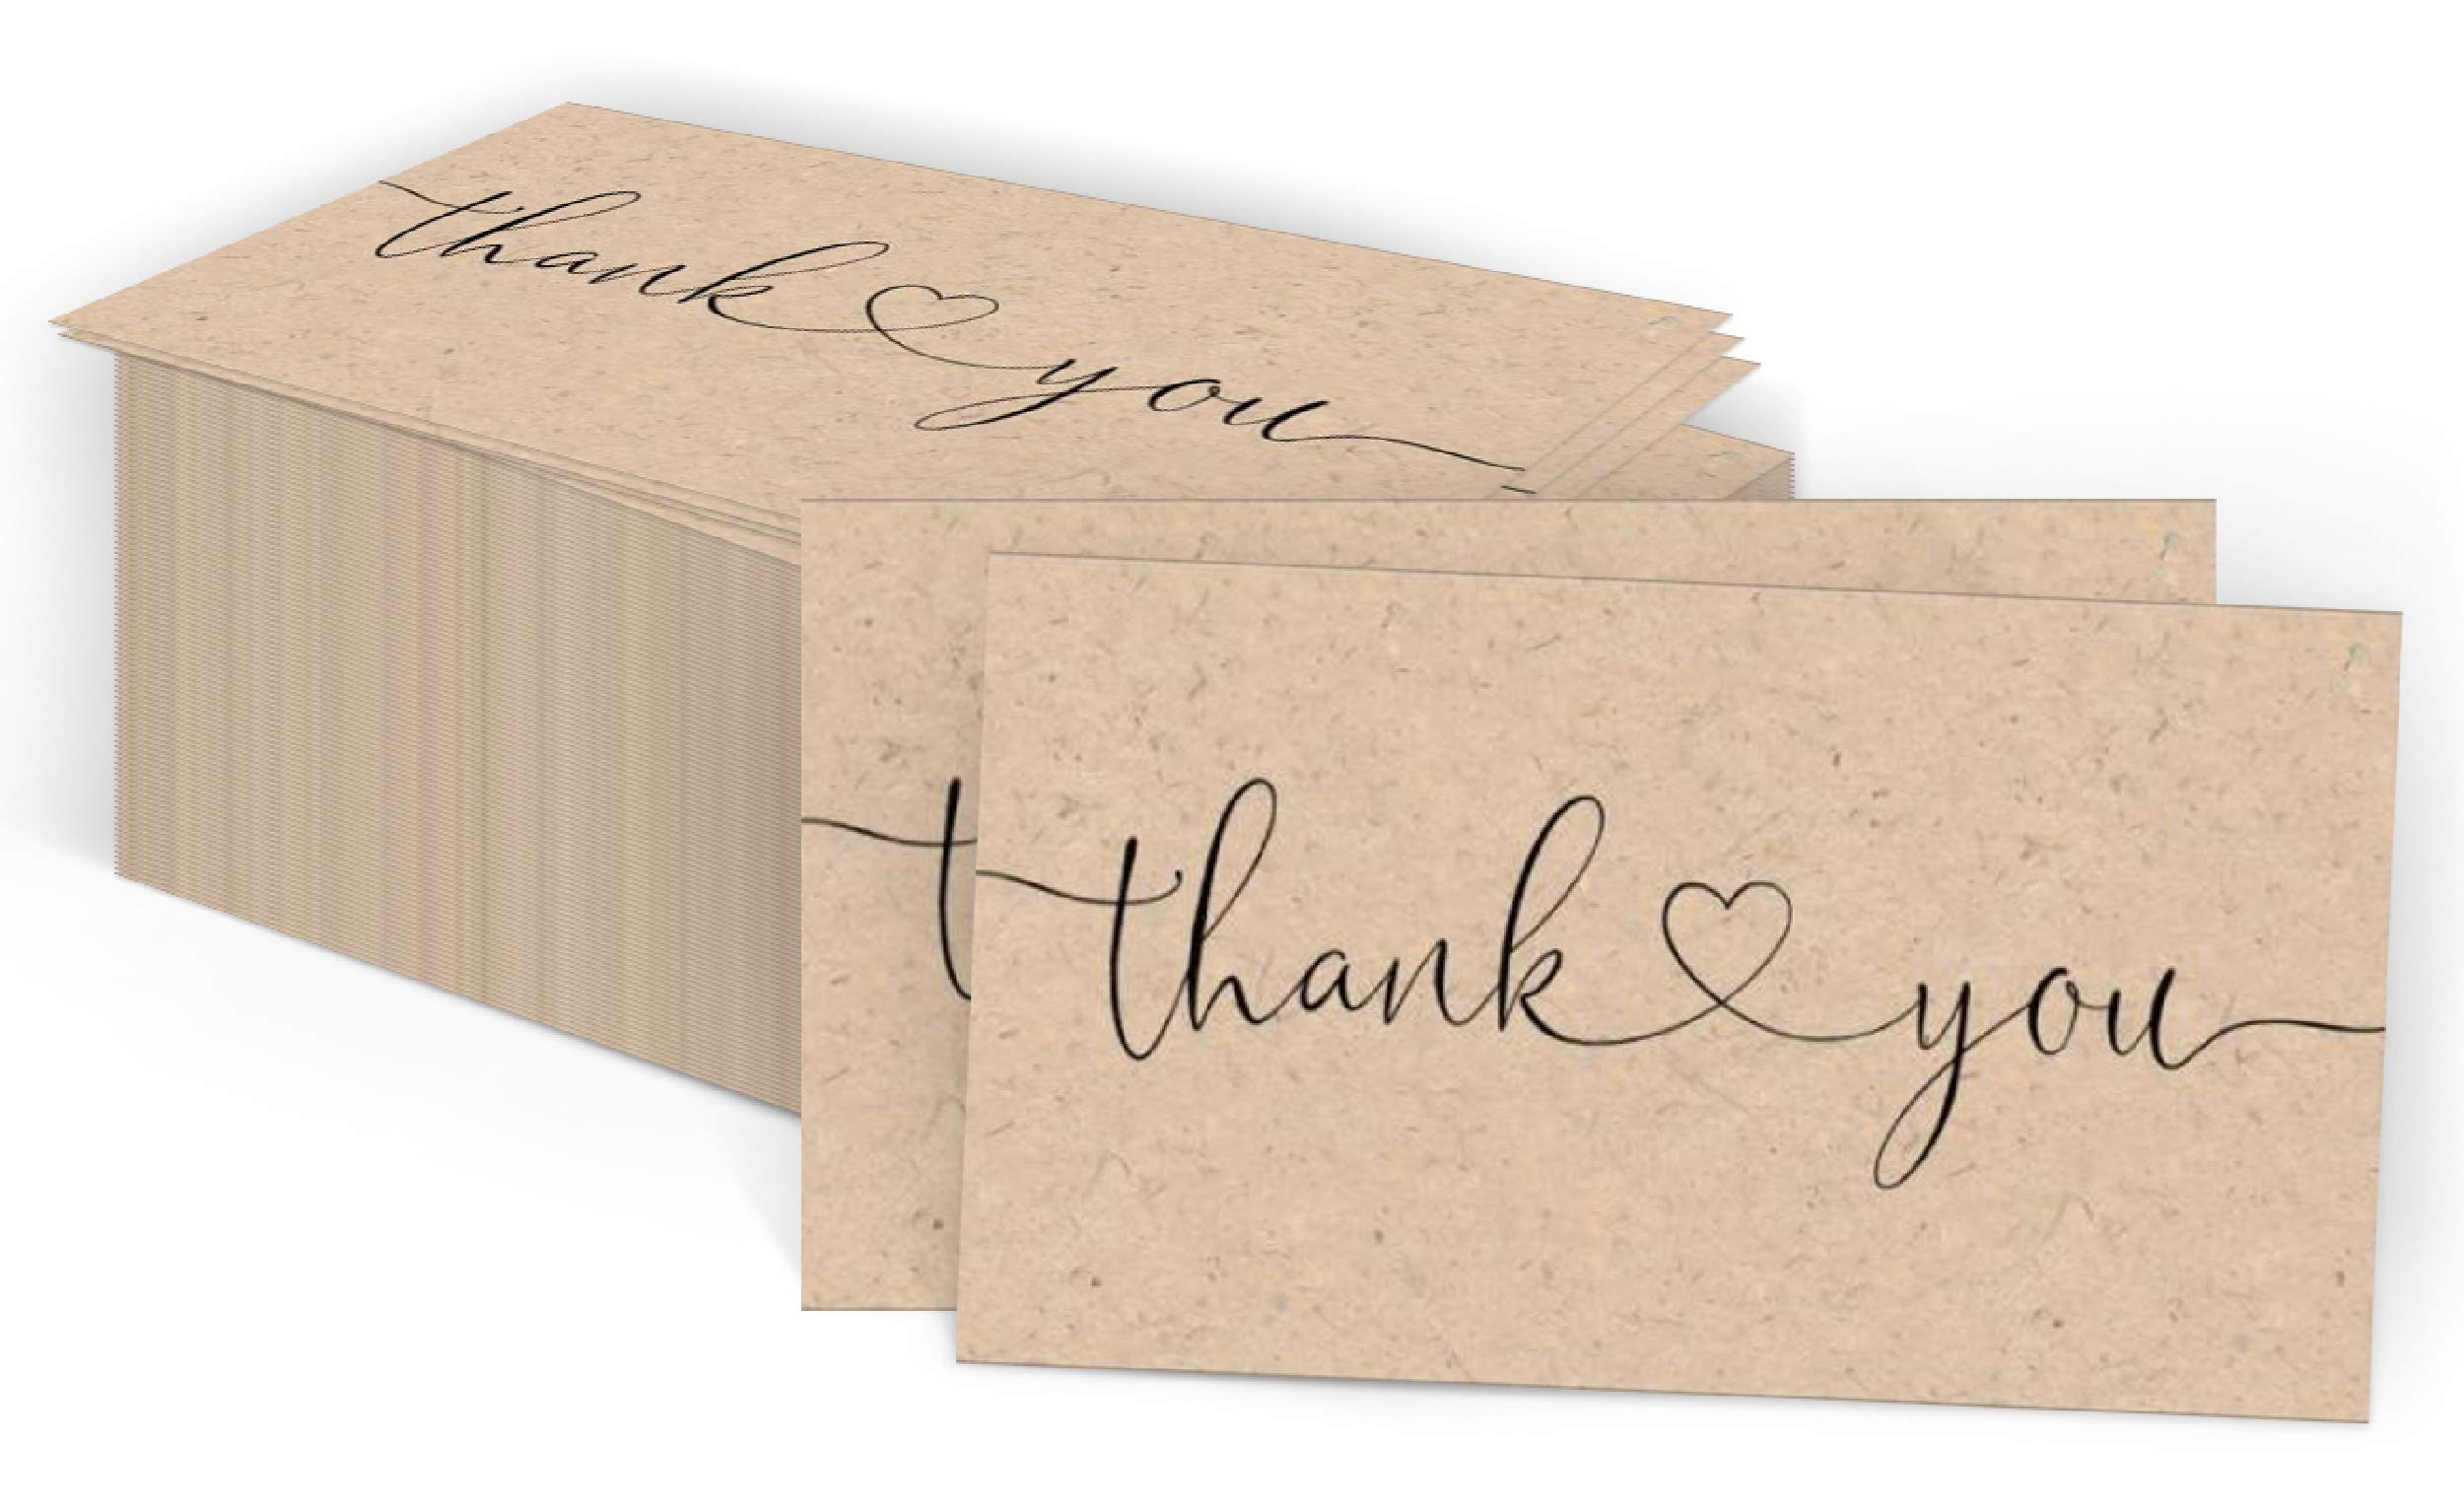 A simple image of a Thank You card